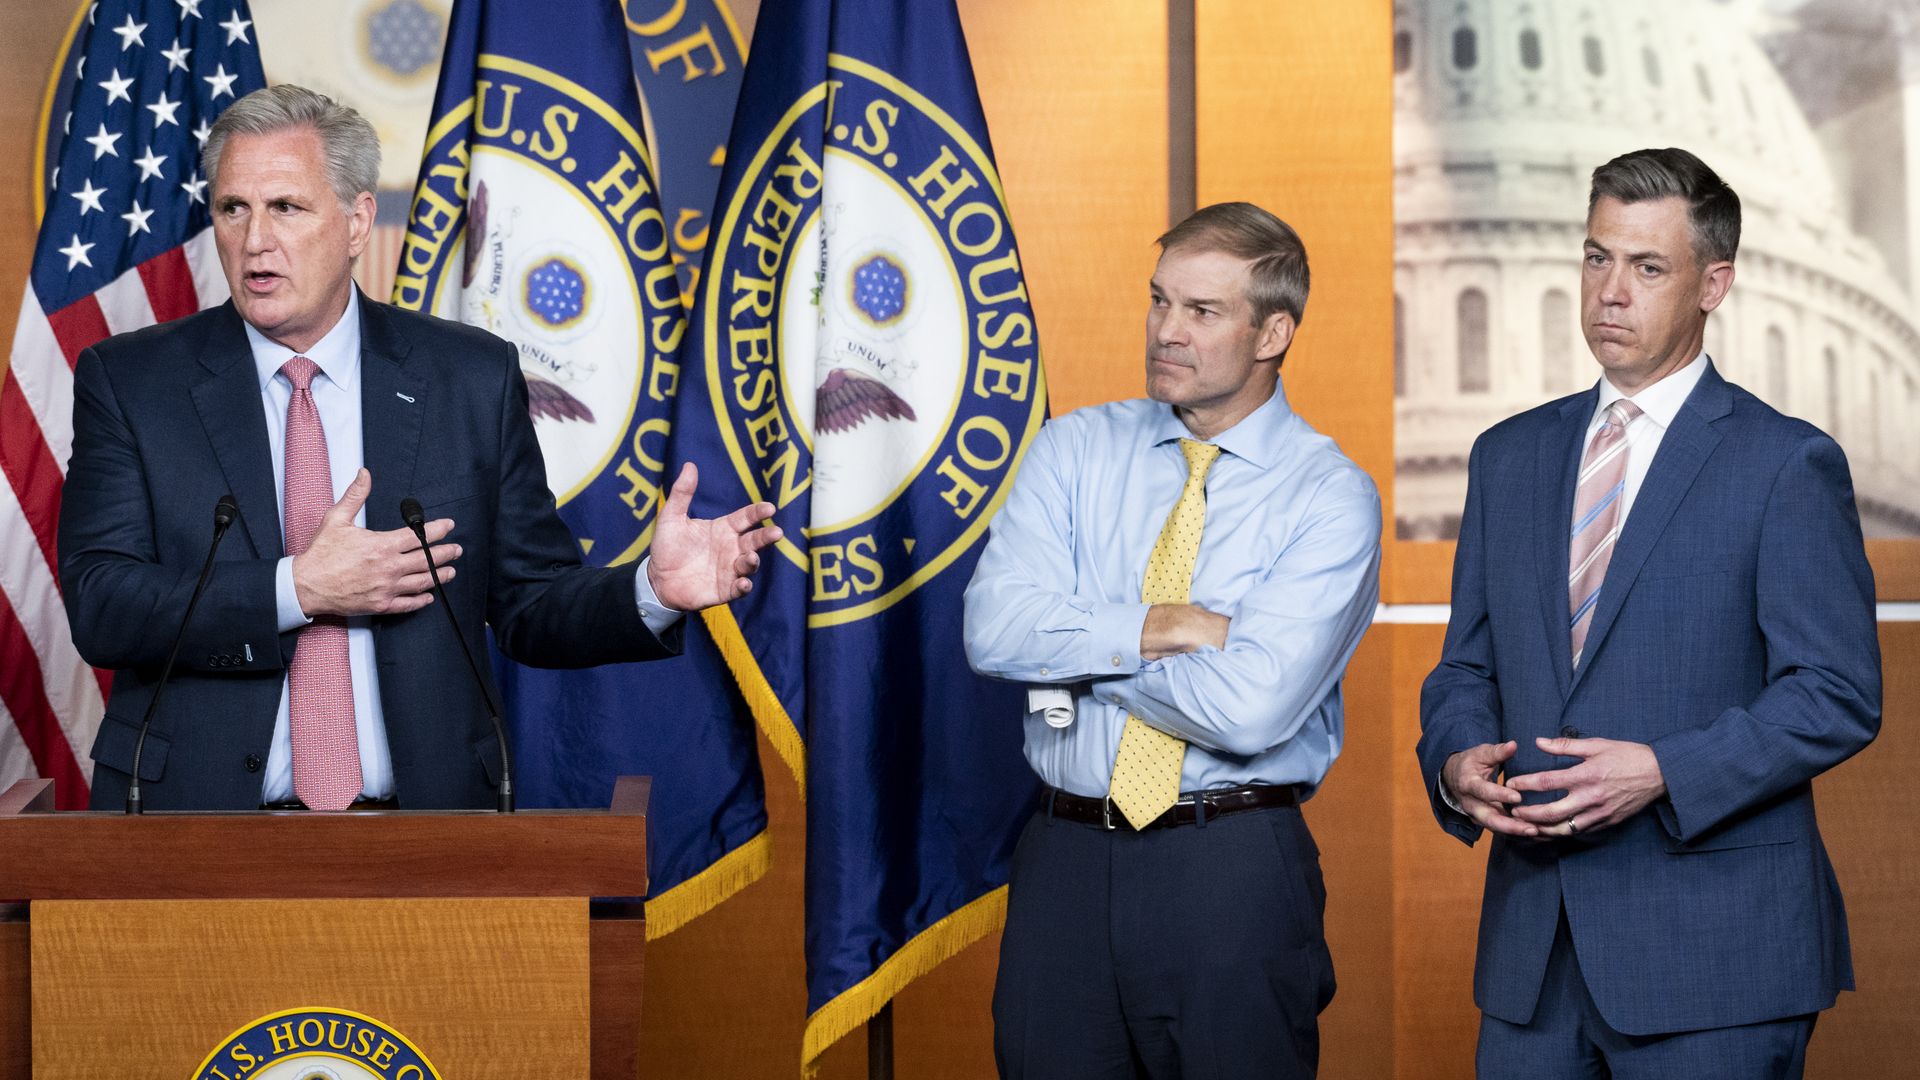 Reps. Jim Jordan and Jim Banks are seen listening as House Minority Leader Kevin McCarthy speaks at a news conference.